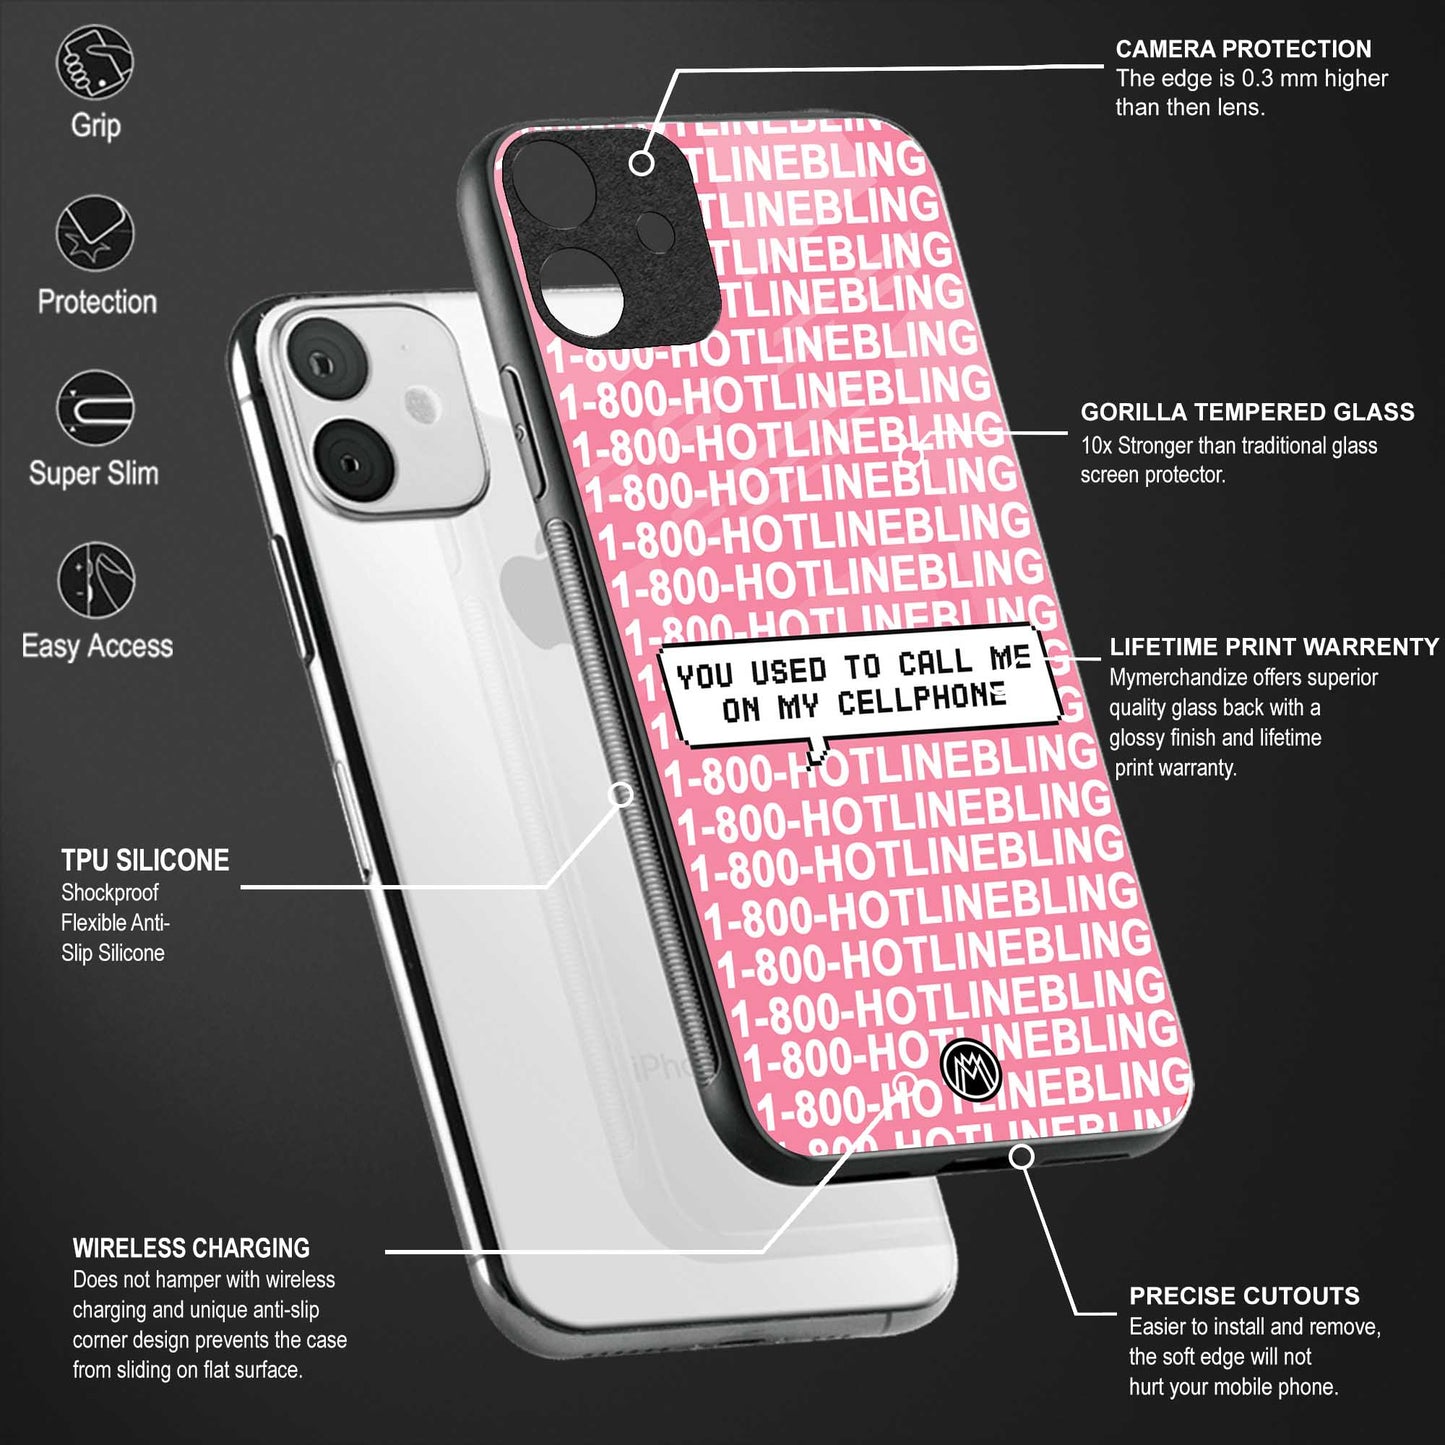 1800 hotline bling phone cover for samsung galaxy a70 